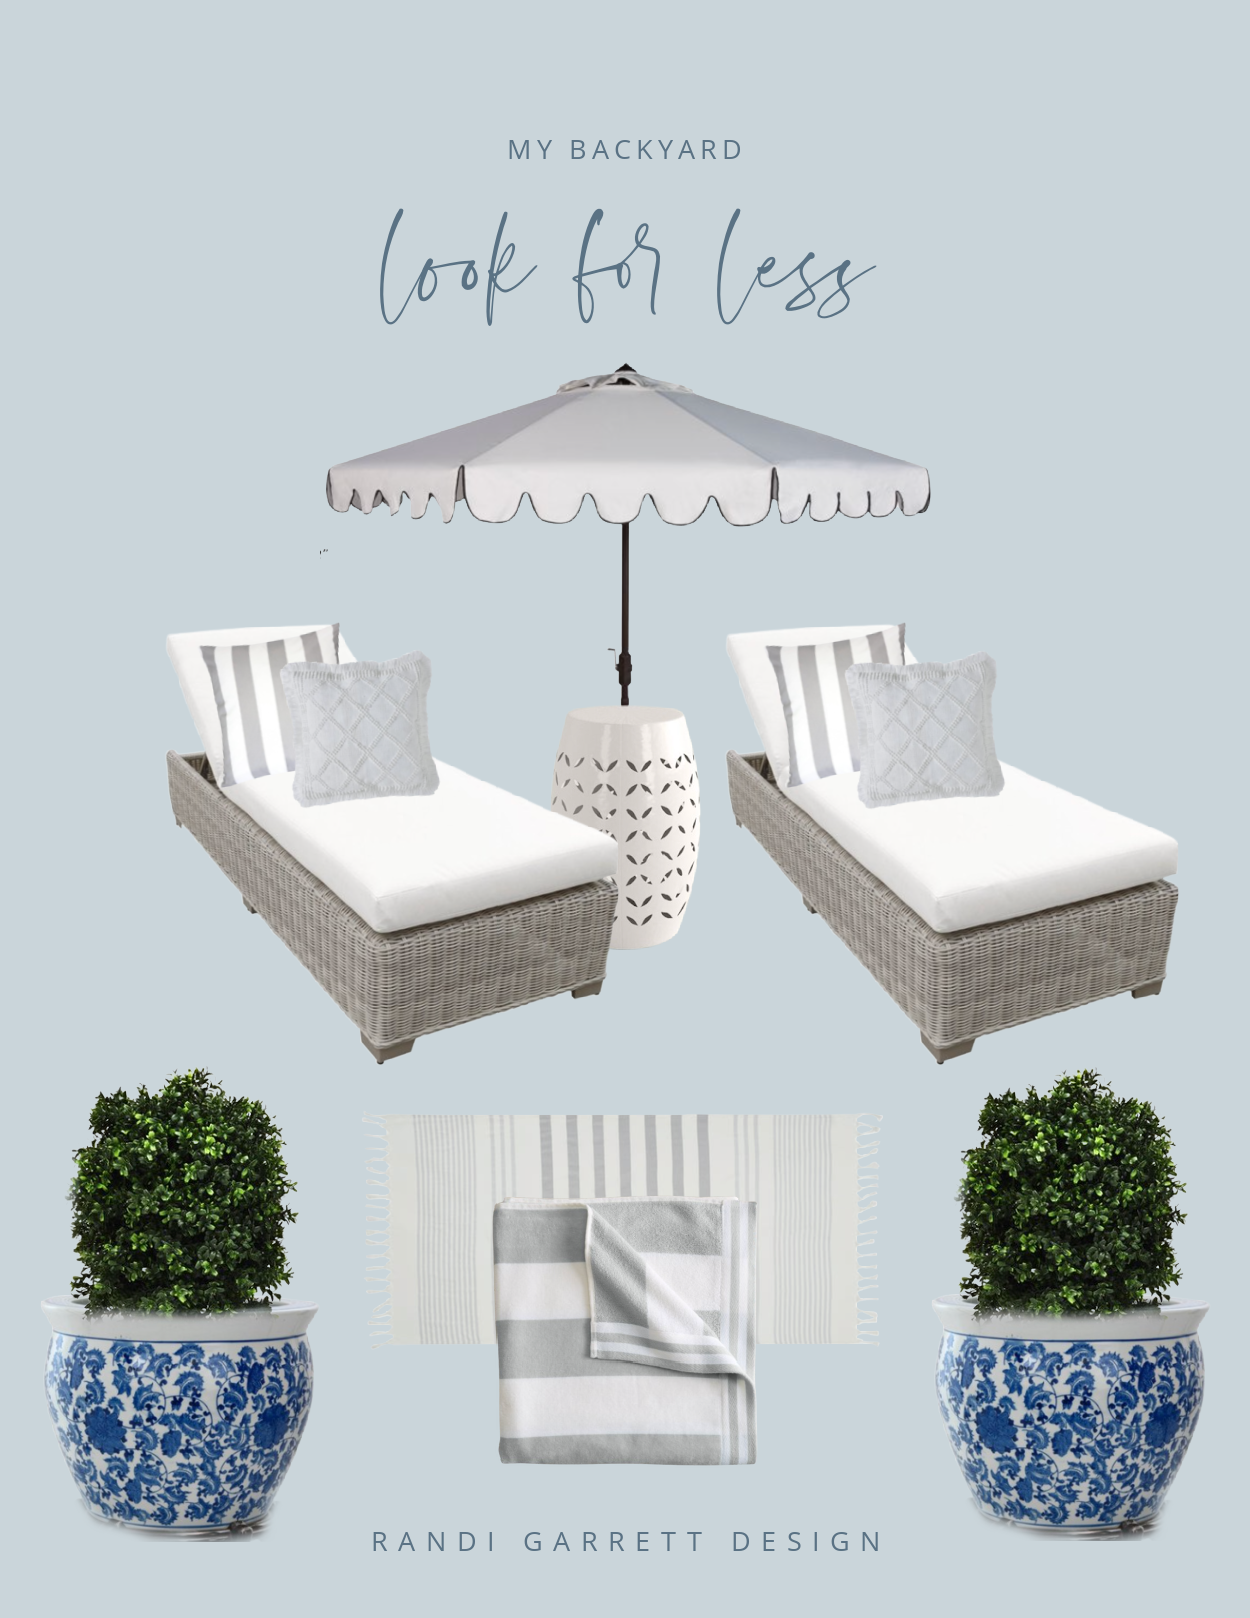 My Look for Less - The Wren's Backyard